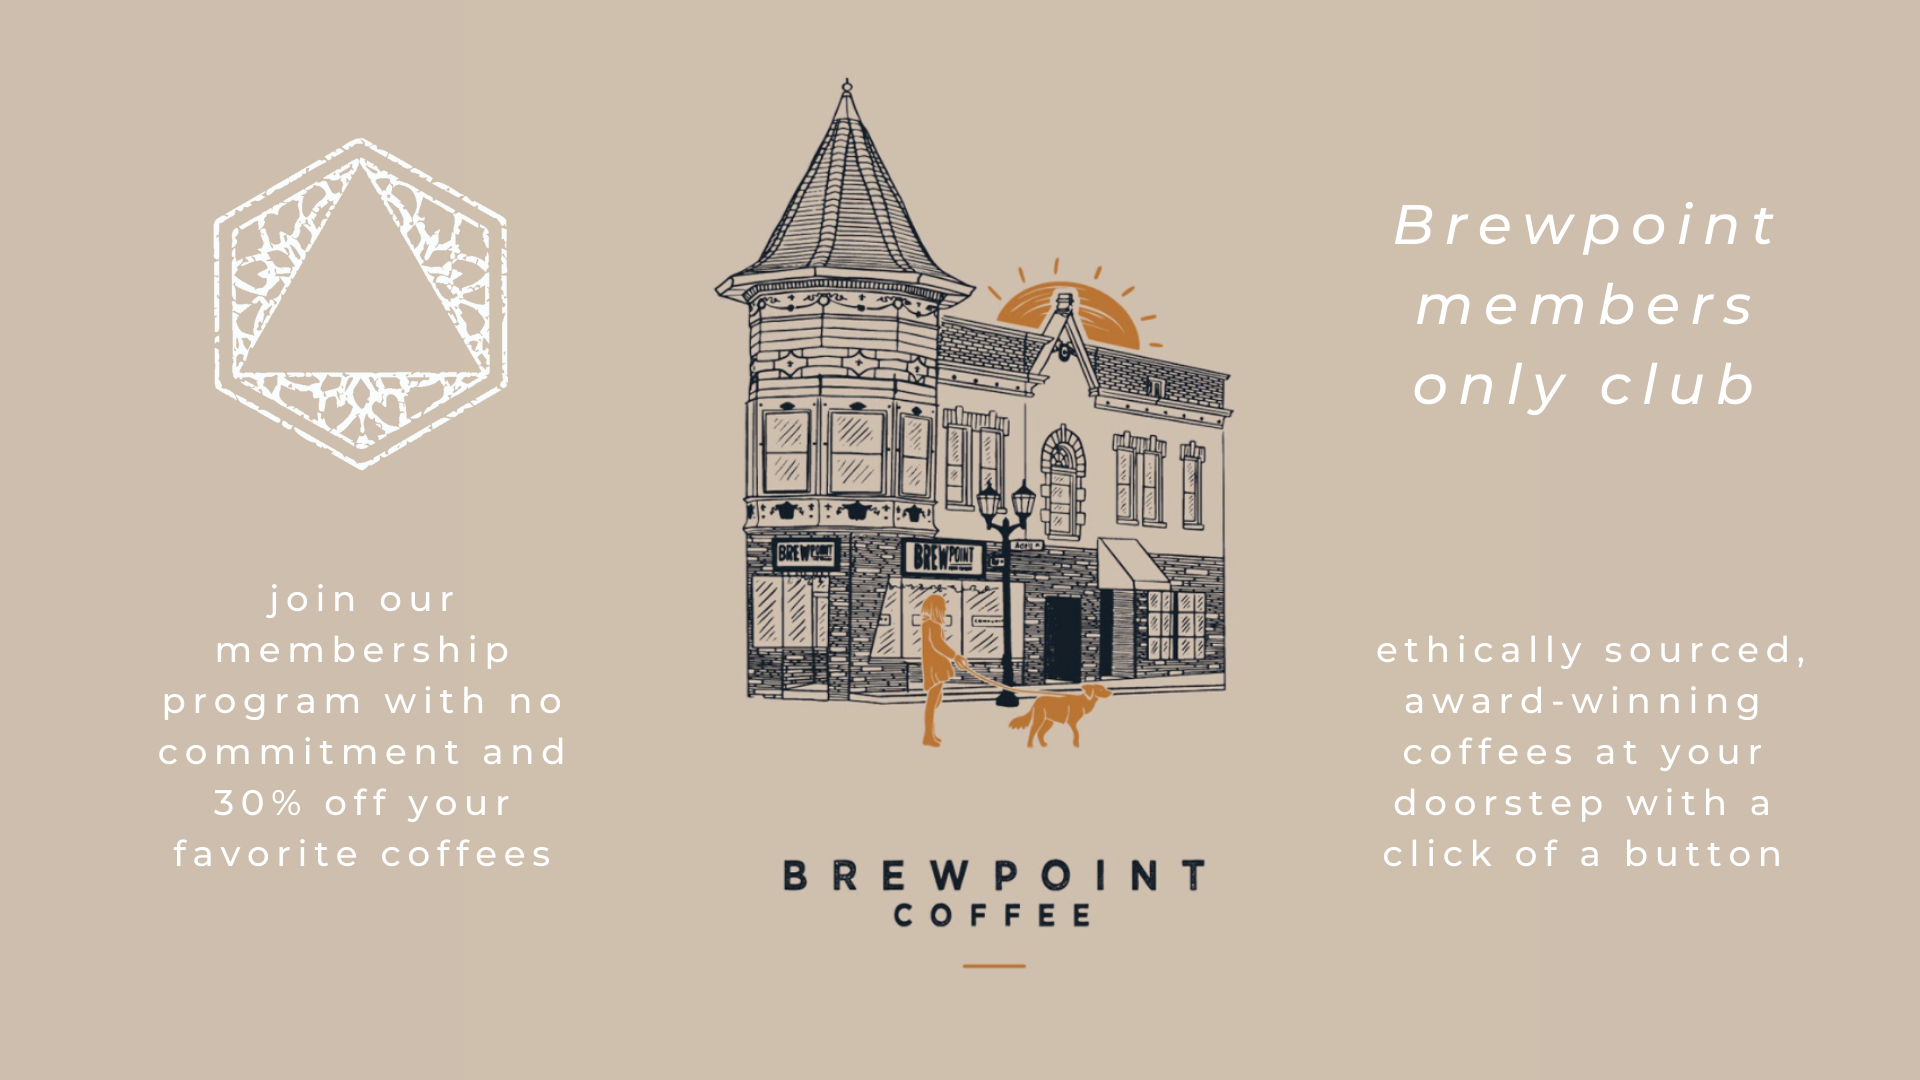 members only club brewpoint membership no commitment favorite coffees ethically sources award winning at your door step